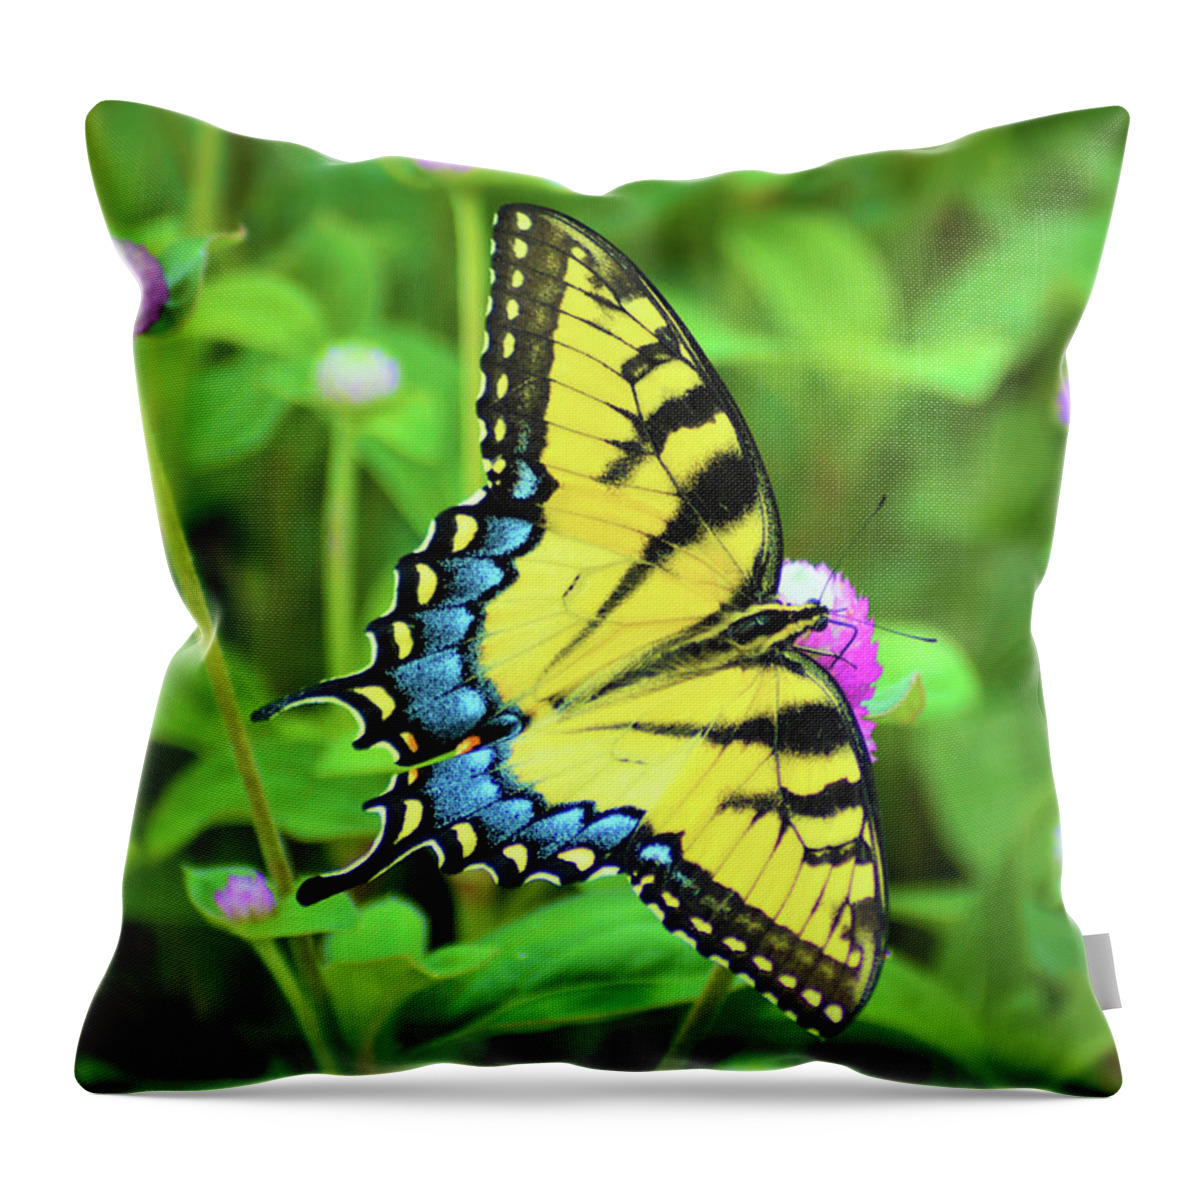 Kathy Kelly Throw Pillow featuring the photograph Swallowtail on Thistle by Kathy Kelly